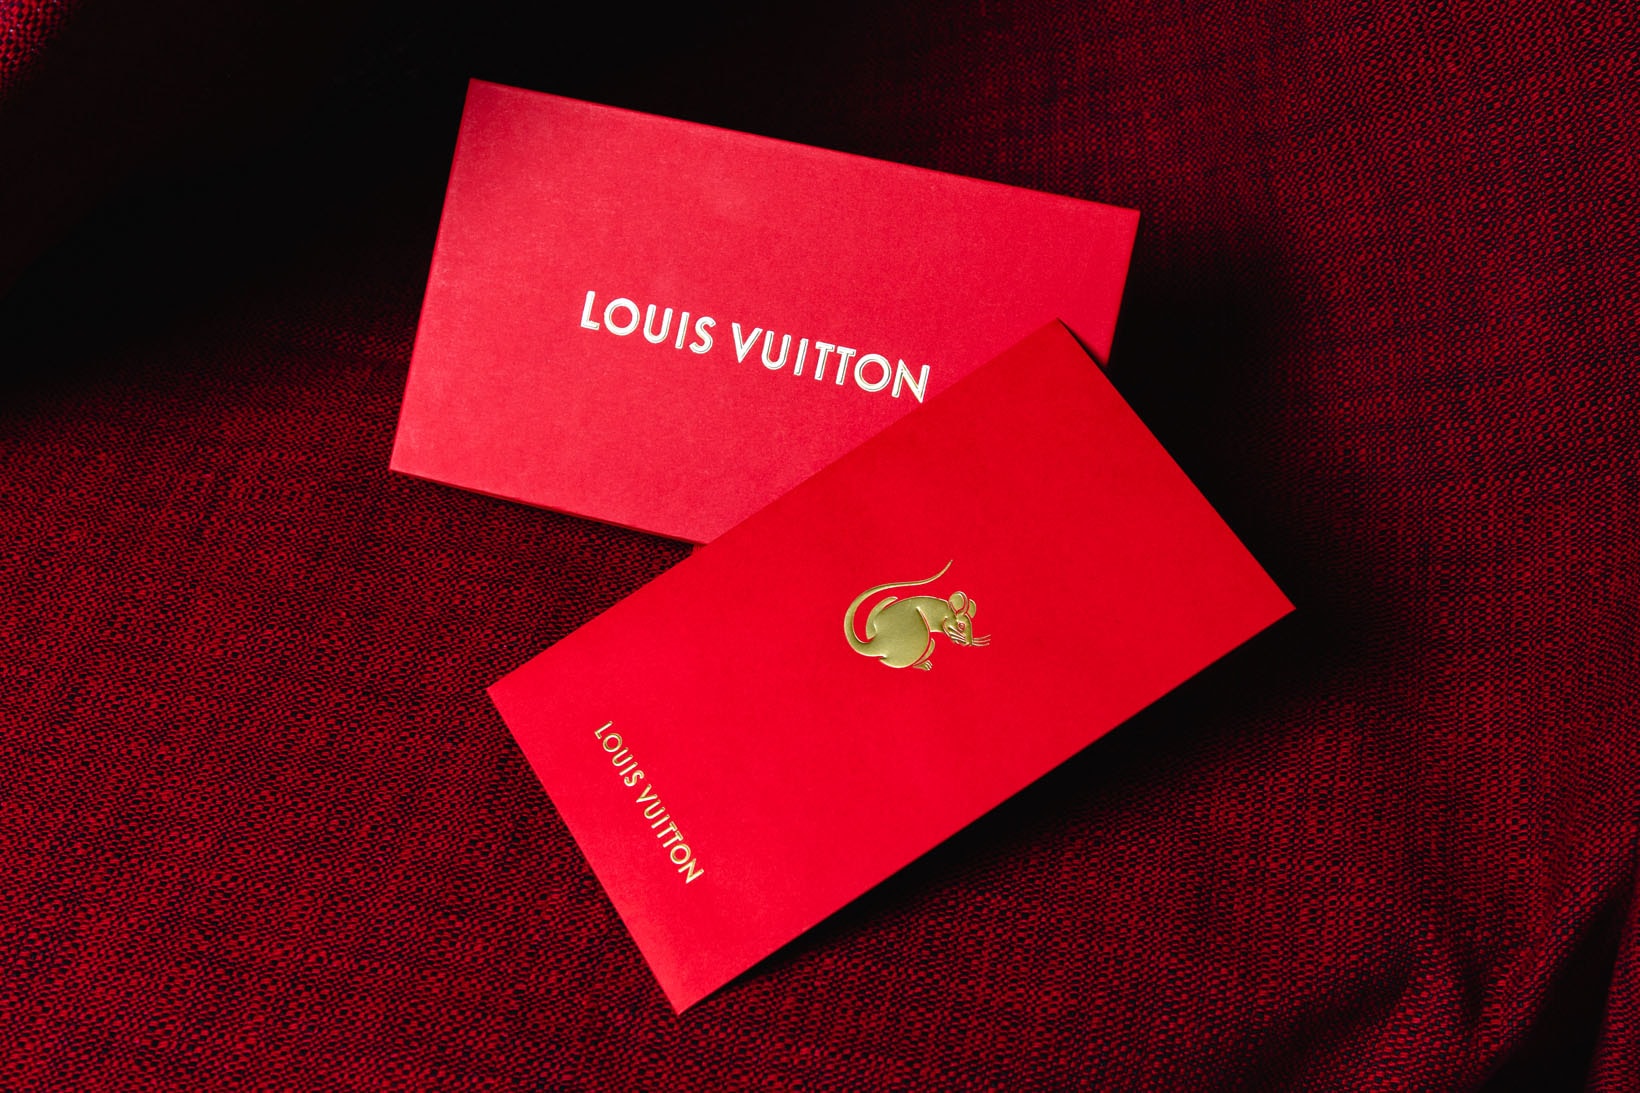 LUNAR NEW YEAR LUXURY 🧧UNBOXINGS 2021  Dior, Hermes, LV, Cartier, Fendi Red  Packets & more 